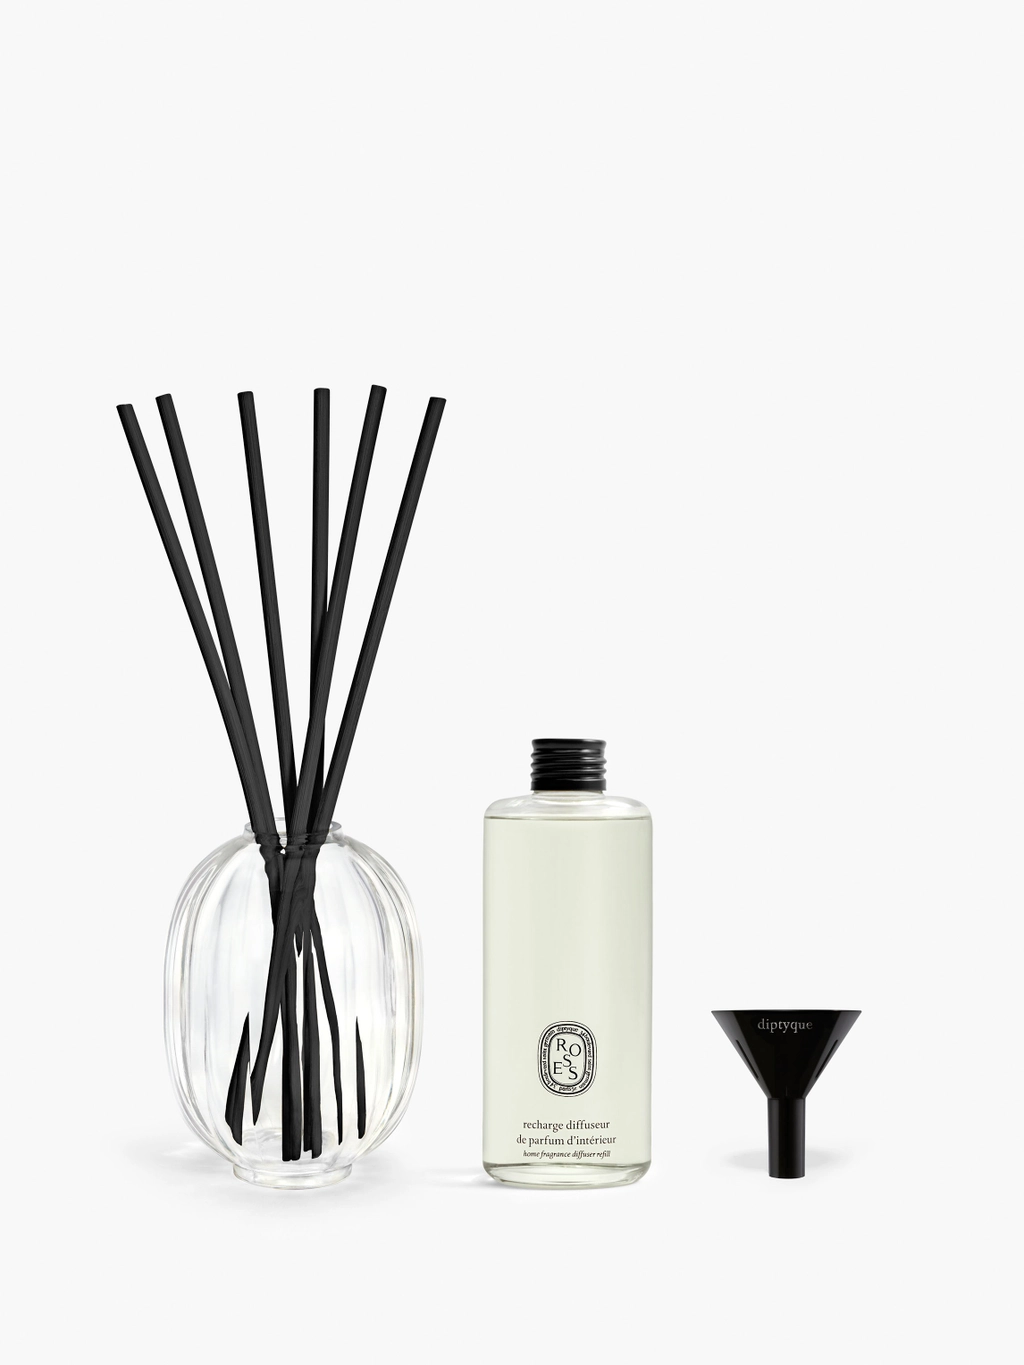 REED DIFFUSER Sandalwood Vanilla in Amber Bottle With 5 Sticks Diffuser Oil  Set Essential Oil Natural Home Fragrance 100ml  Uk 